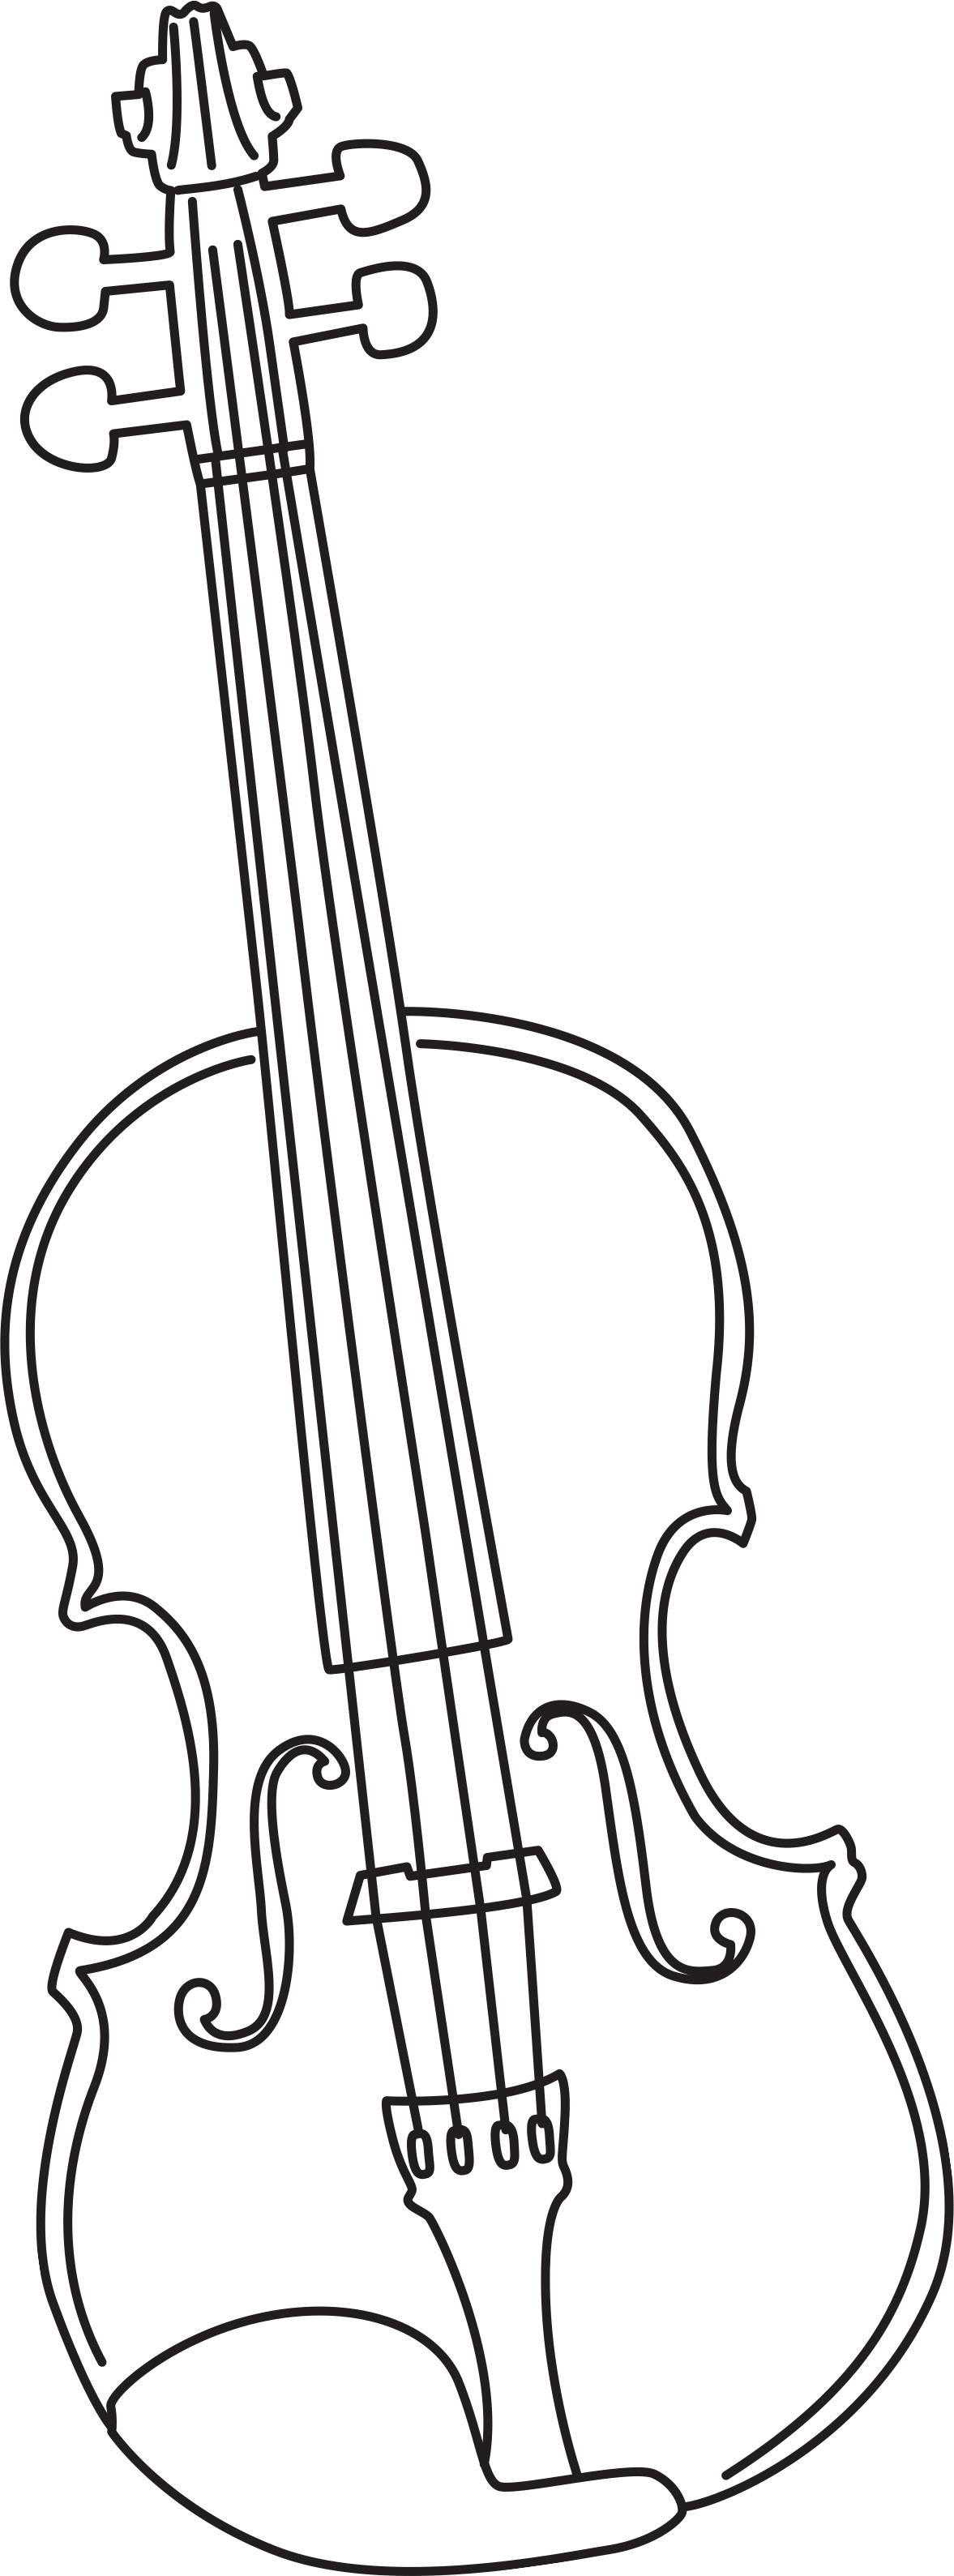 20+ Inspiration Cello Drawing Easy | Charmimsy